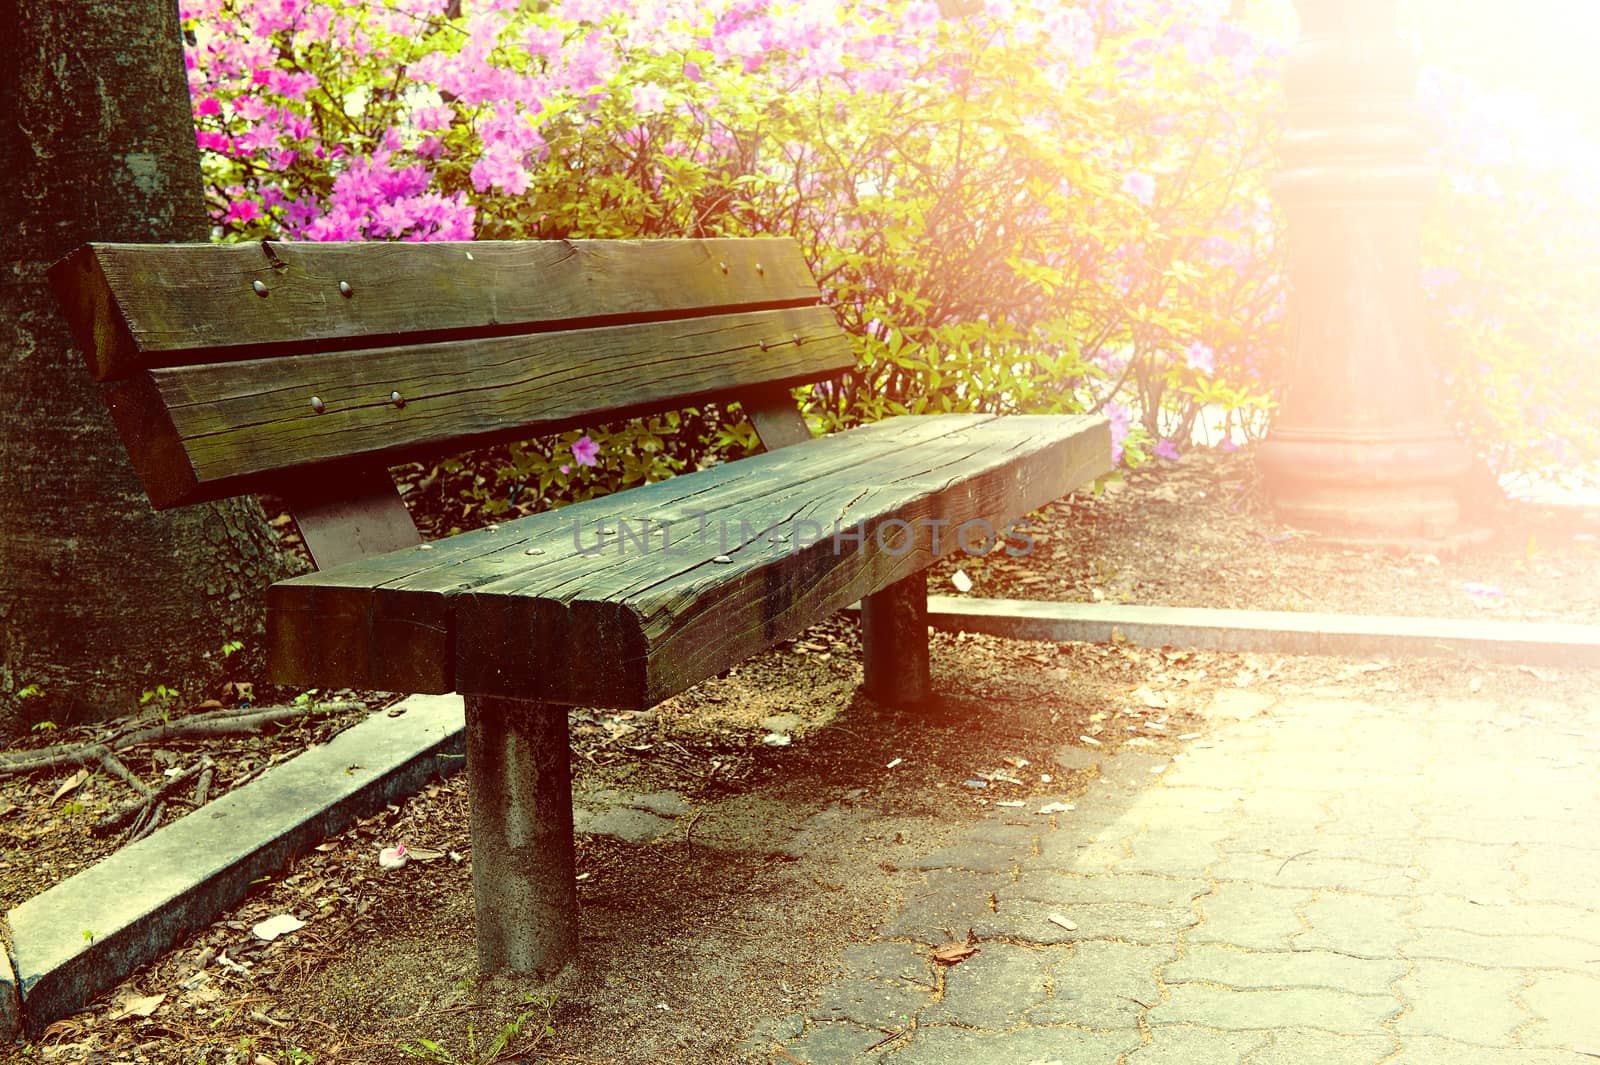 Wooden bench in park with vintage color. by gutarphotoghaphy